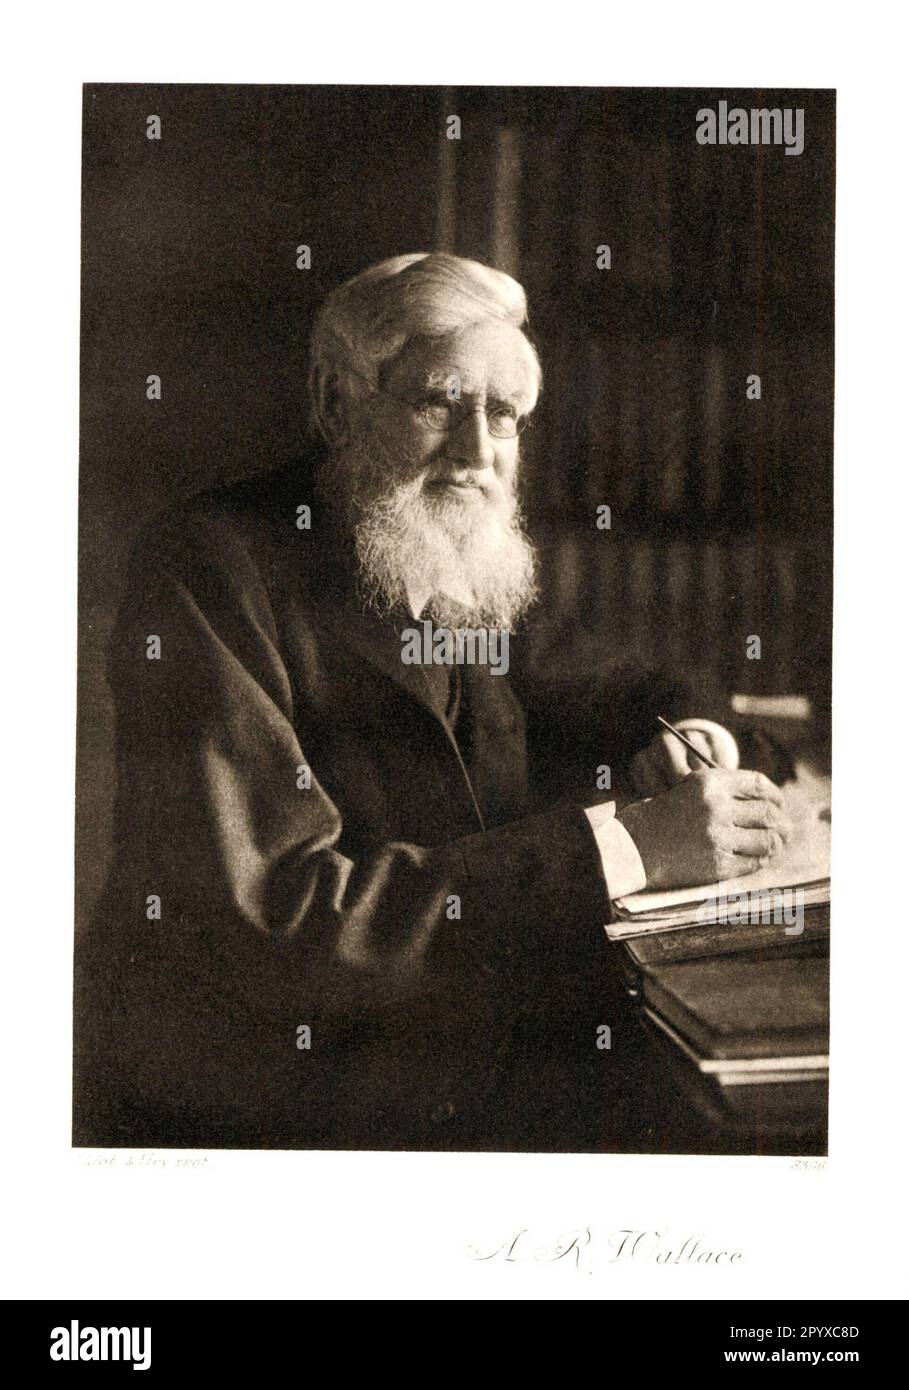 Alfred Russel Wallace (1823-1913), British zoologist and explorer. Wallace proposed the theory of selection as the cause of species change independently of Charles Darwin. nPhotograph by Elliot and Fry. Photo: Heliogravure, Corpus Imaginum, Hanfstaengl Collection. [automated translation] Stock Photo